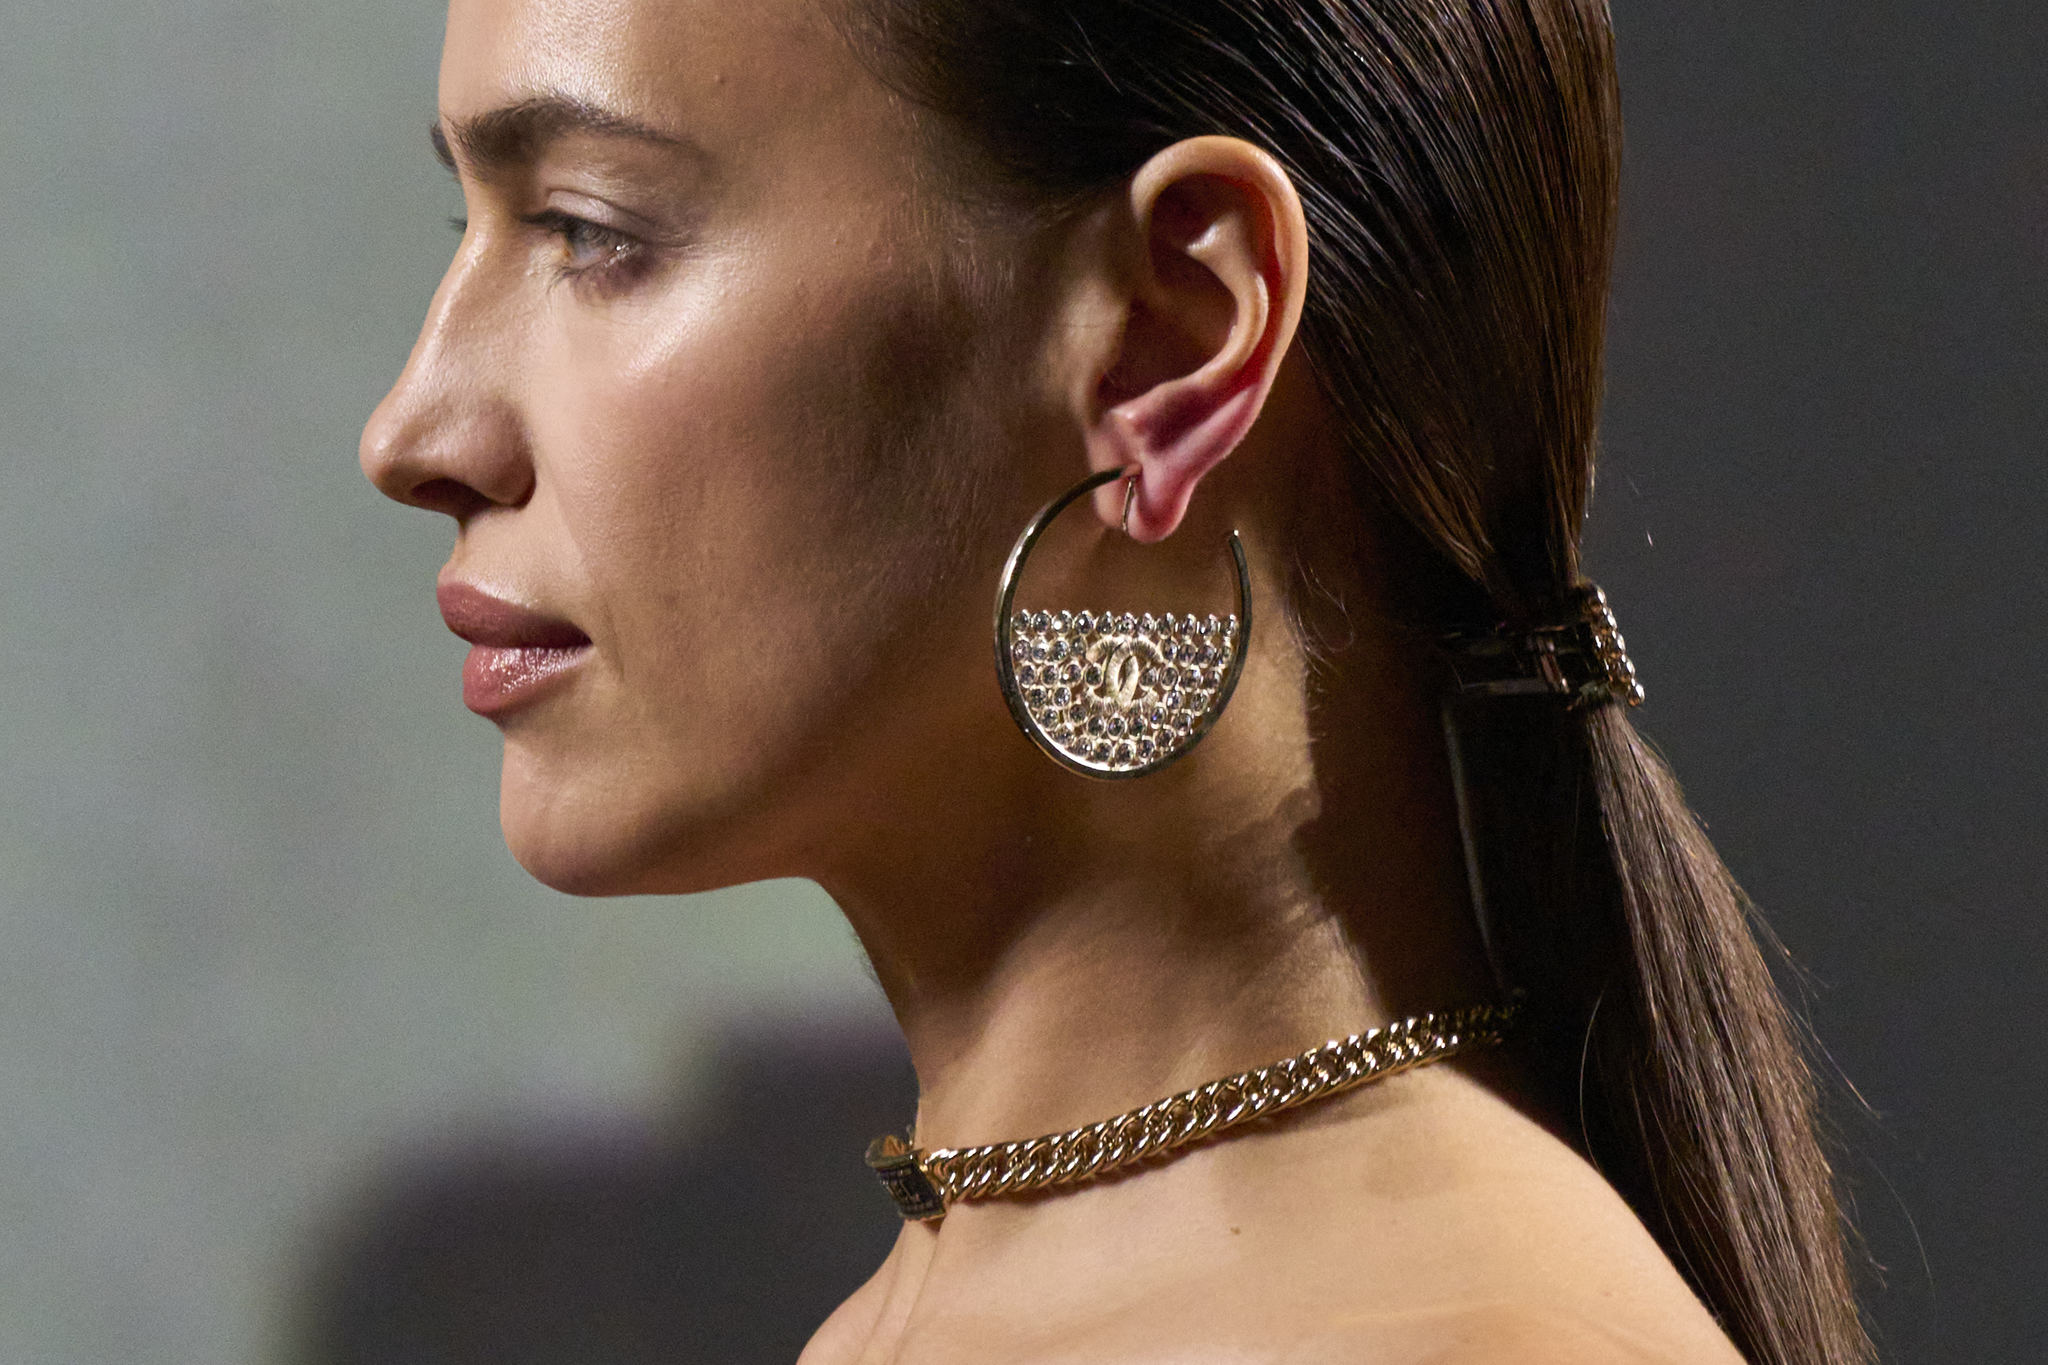 Barrettes and low ponytails like the one worn by Irina Shayk are paired with maxi earrings and bright, natural makeup at the Chanel Spring Summer 2023 show.